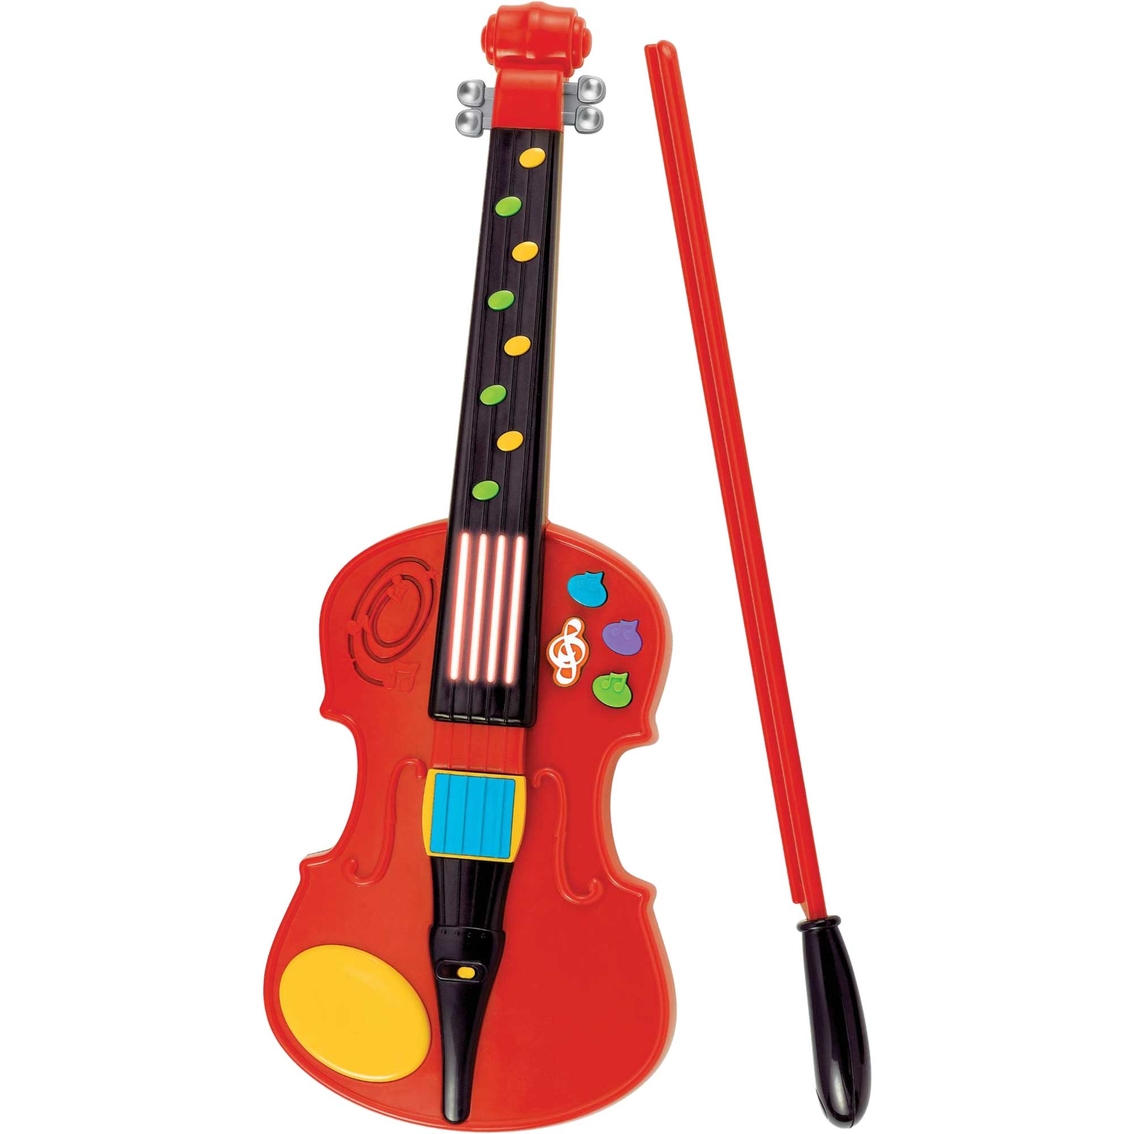 Little Virtuoso Fun Fiddle Violin Toy Ages 3 for sale online